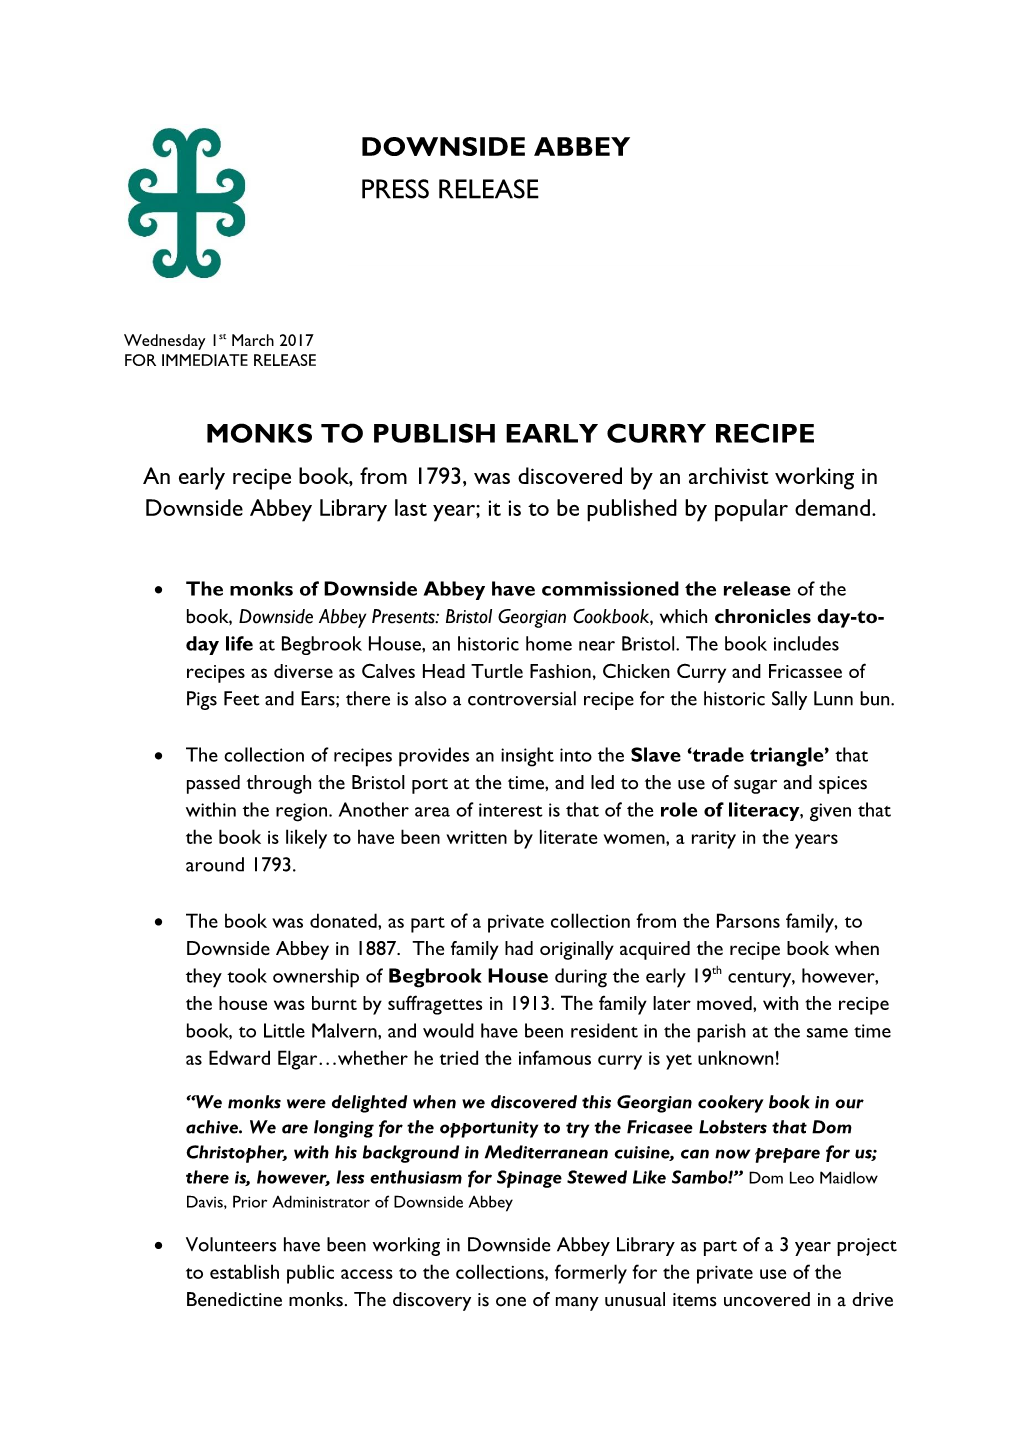 Monks to Publish Early Curry Recipe Downside Abbey